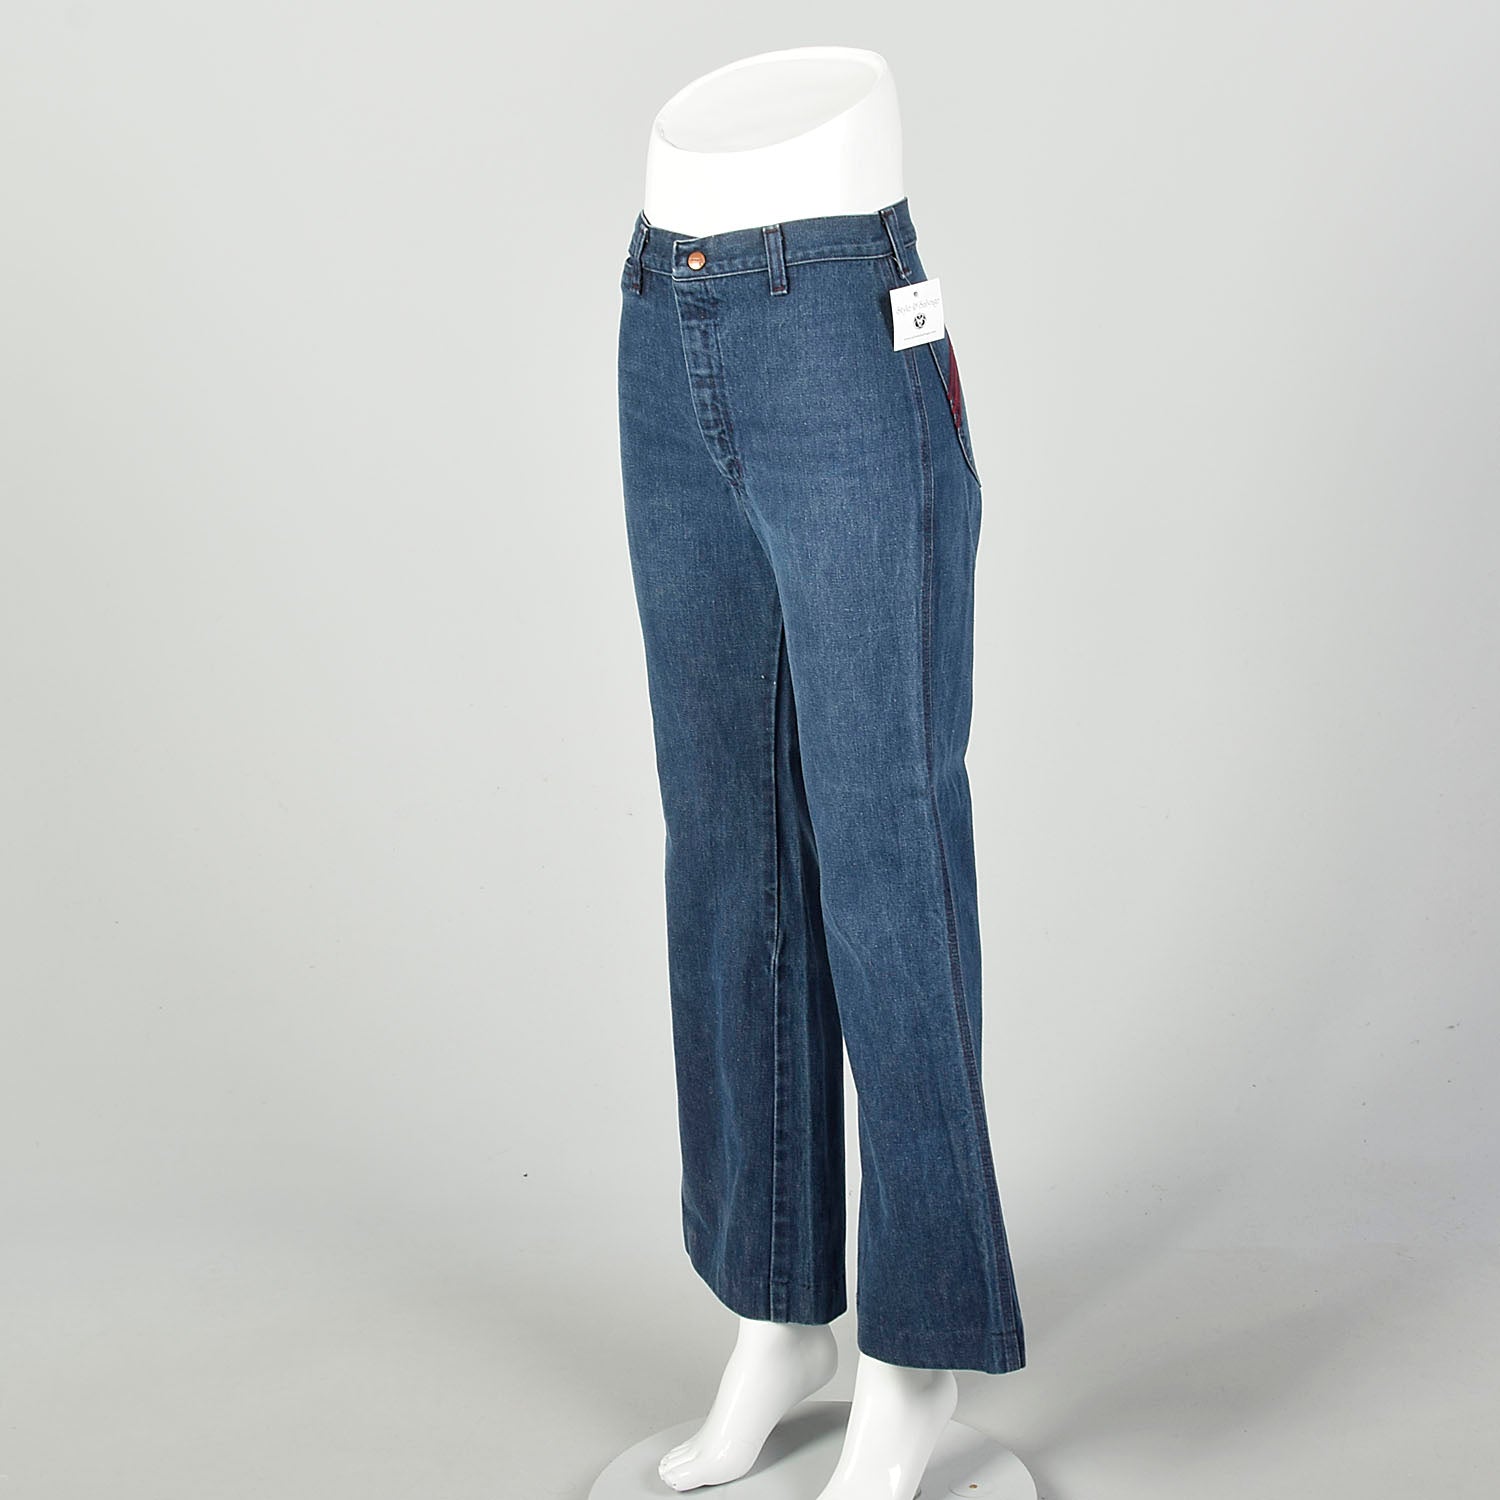 Small 1970s High Waisted Jeans Hippie Bell Bottoms Embroidered Pockets